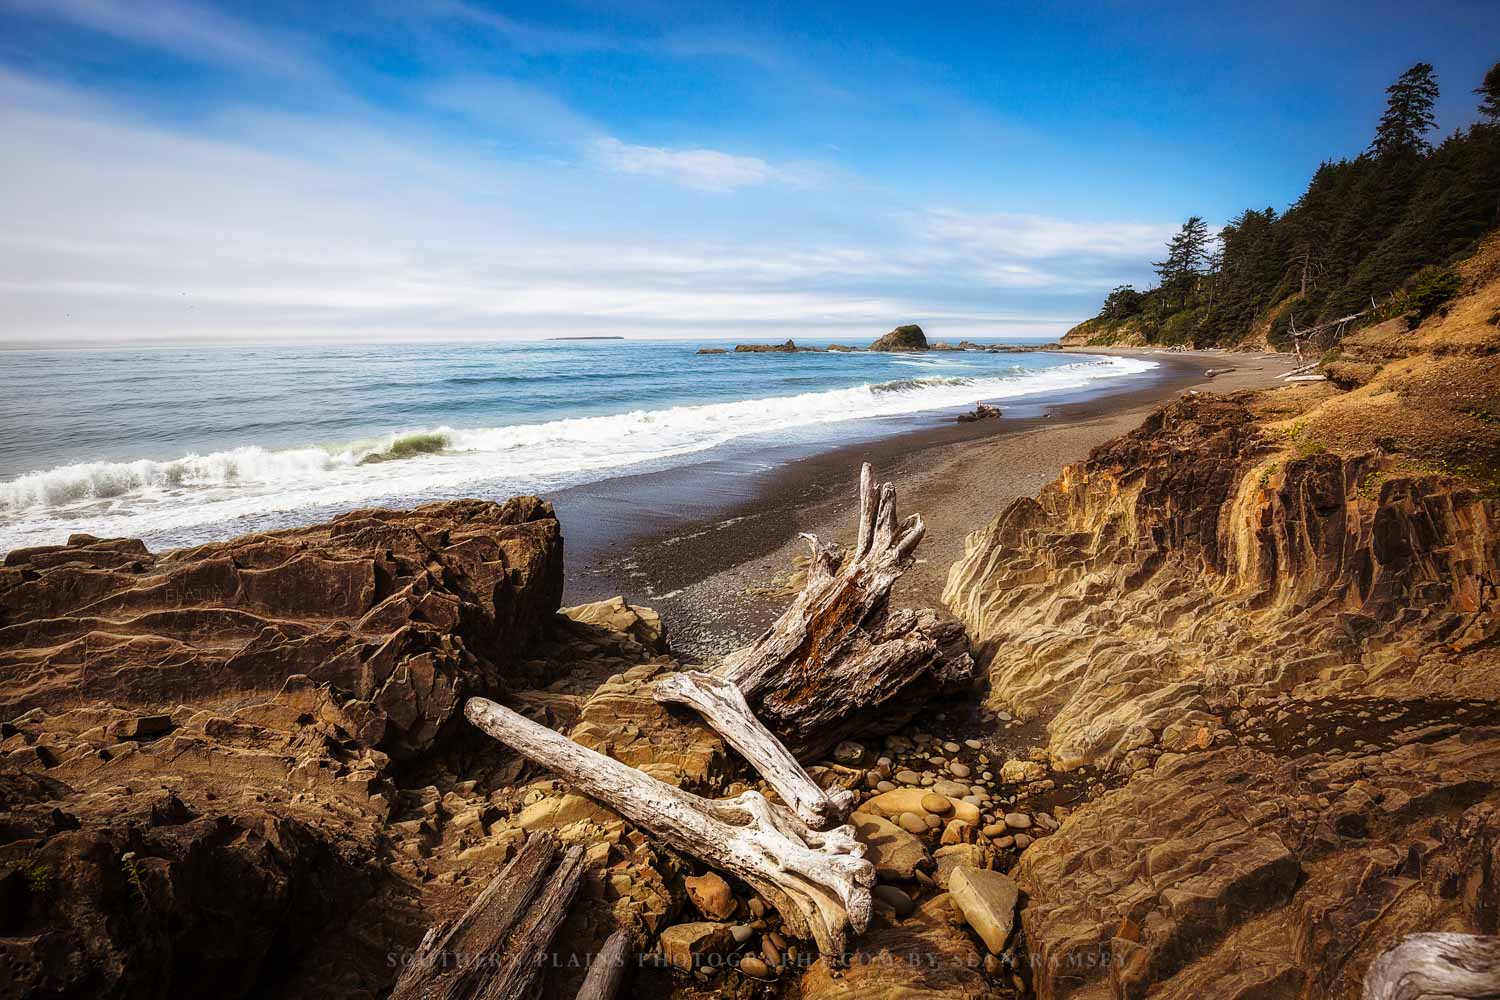 Pacific Northwest coastal photography print of driftwood logs resting on the shore along a beach in Washington state by Sean Ramsey of Southern Plains Photography.